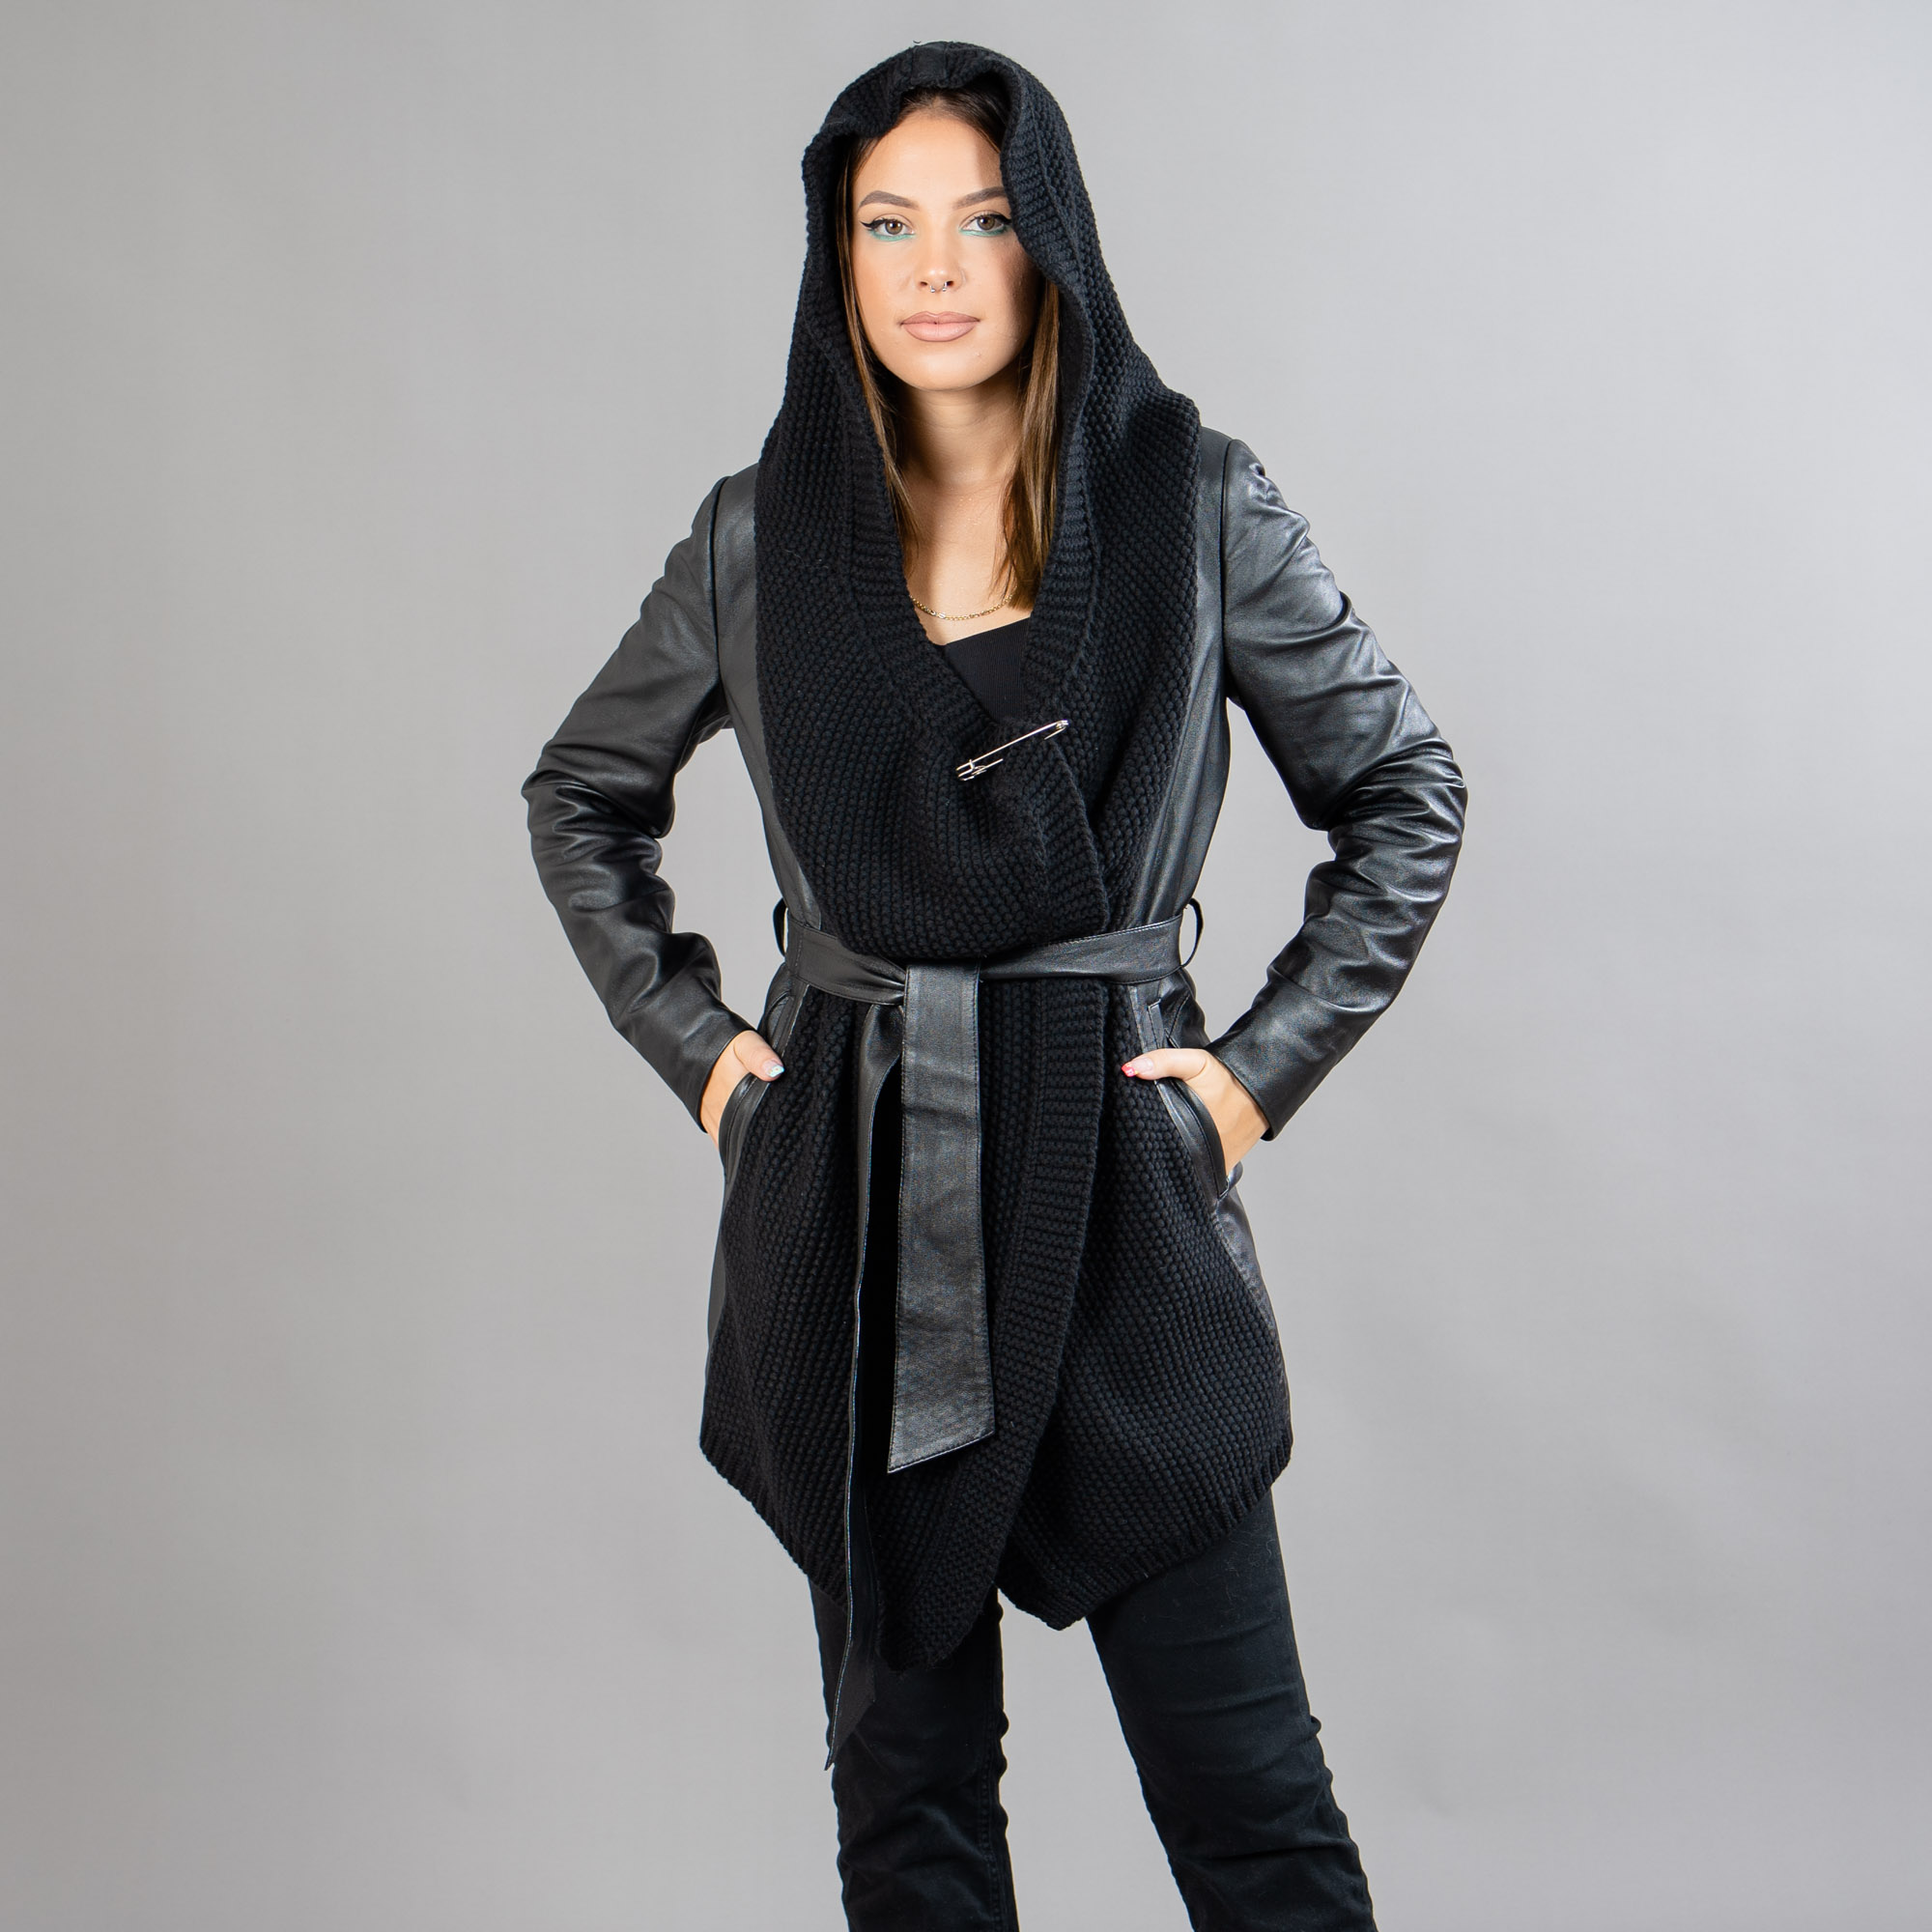 Leather jacket with a hood in black color